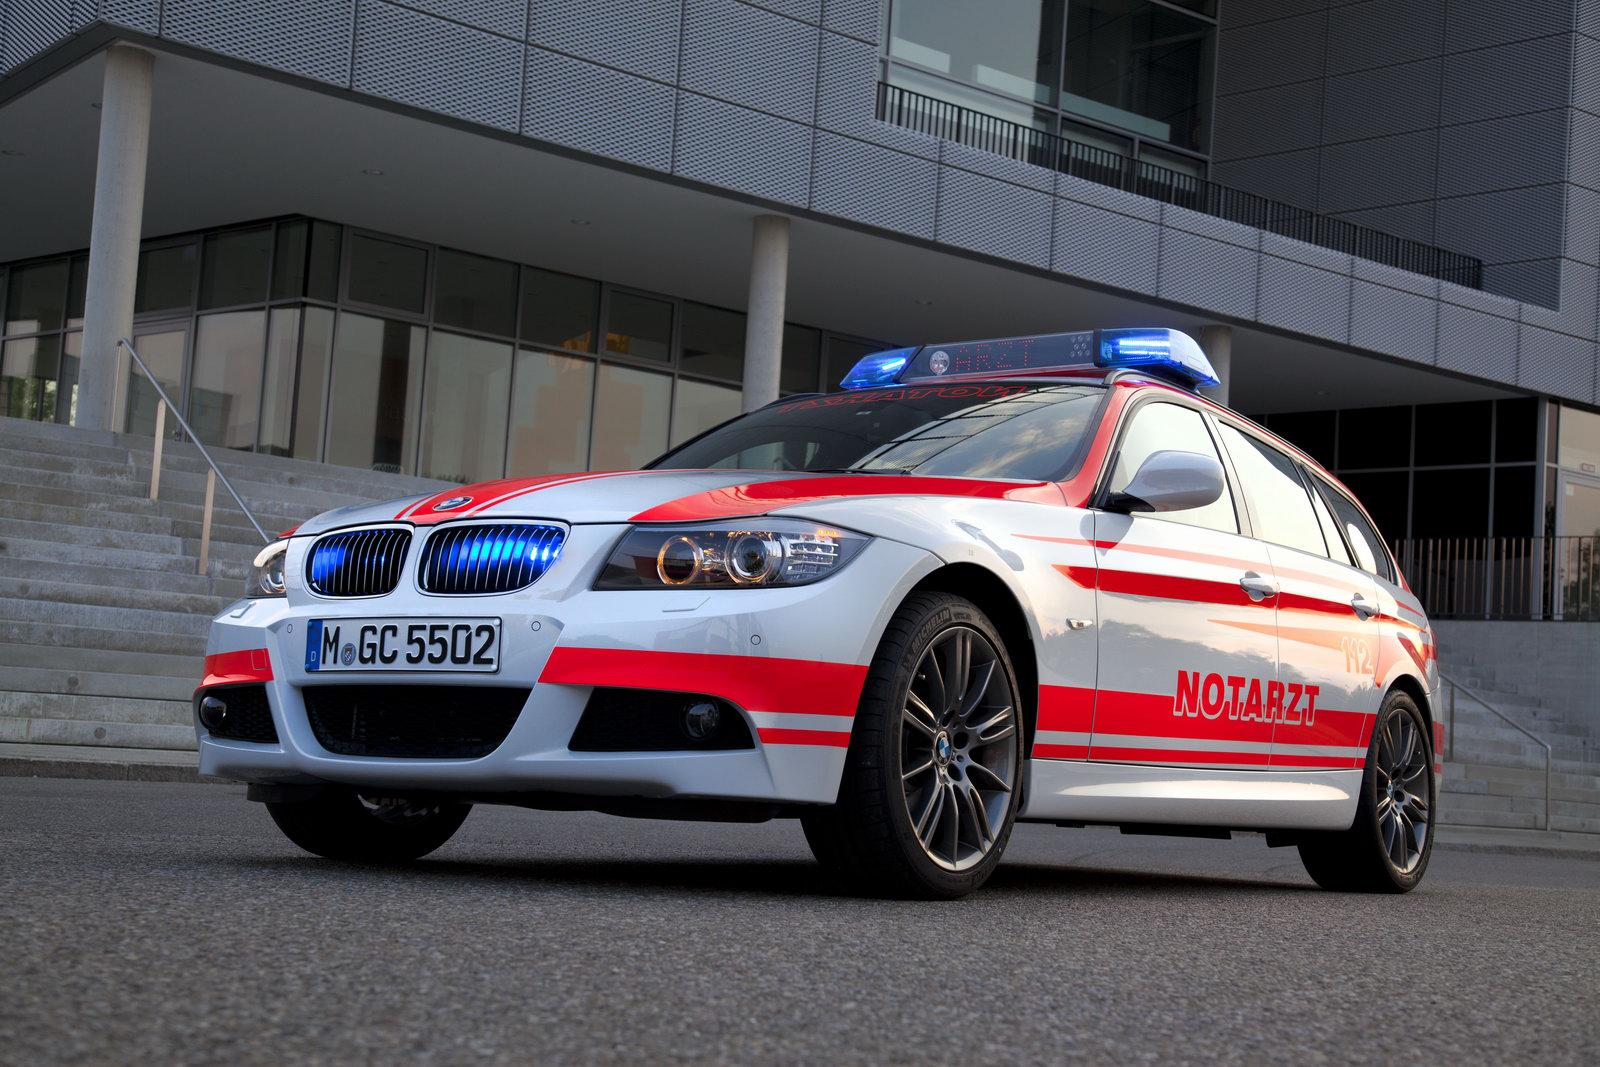 BMW presented emergency vehicles at the 2011 RETTmobil event in Germany